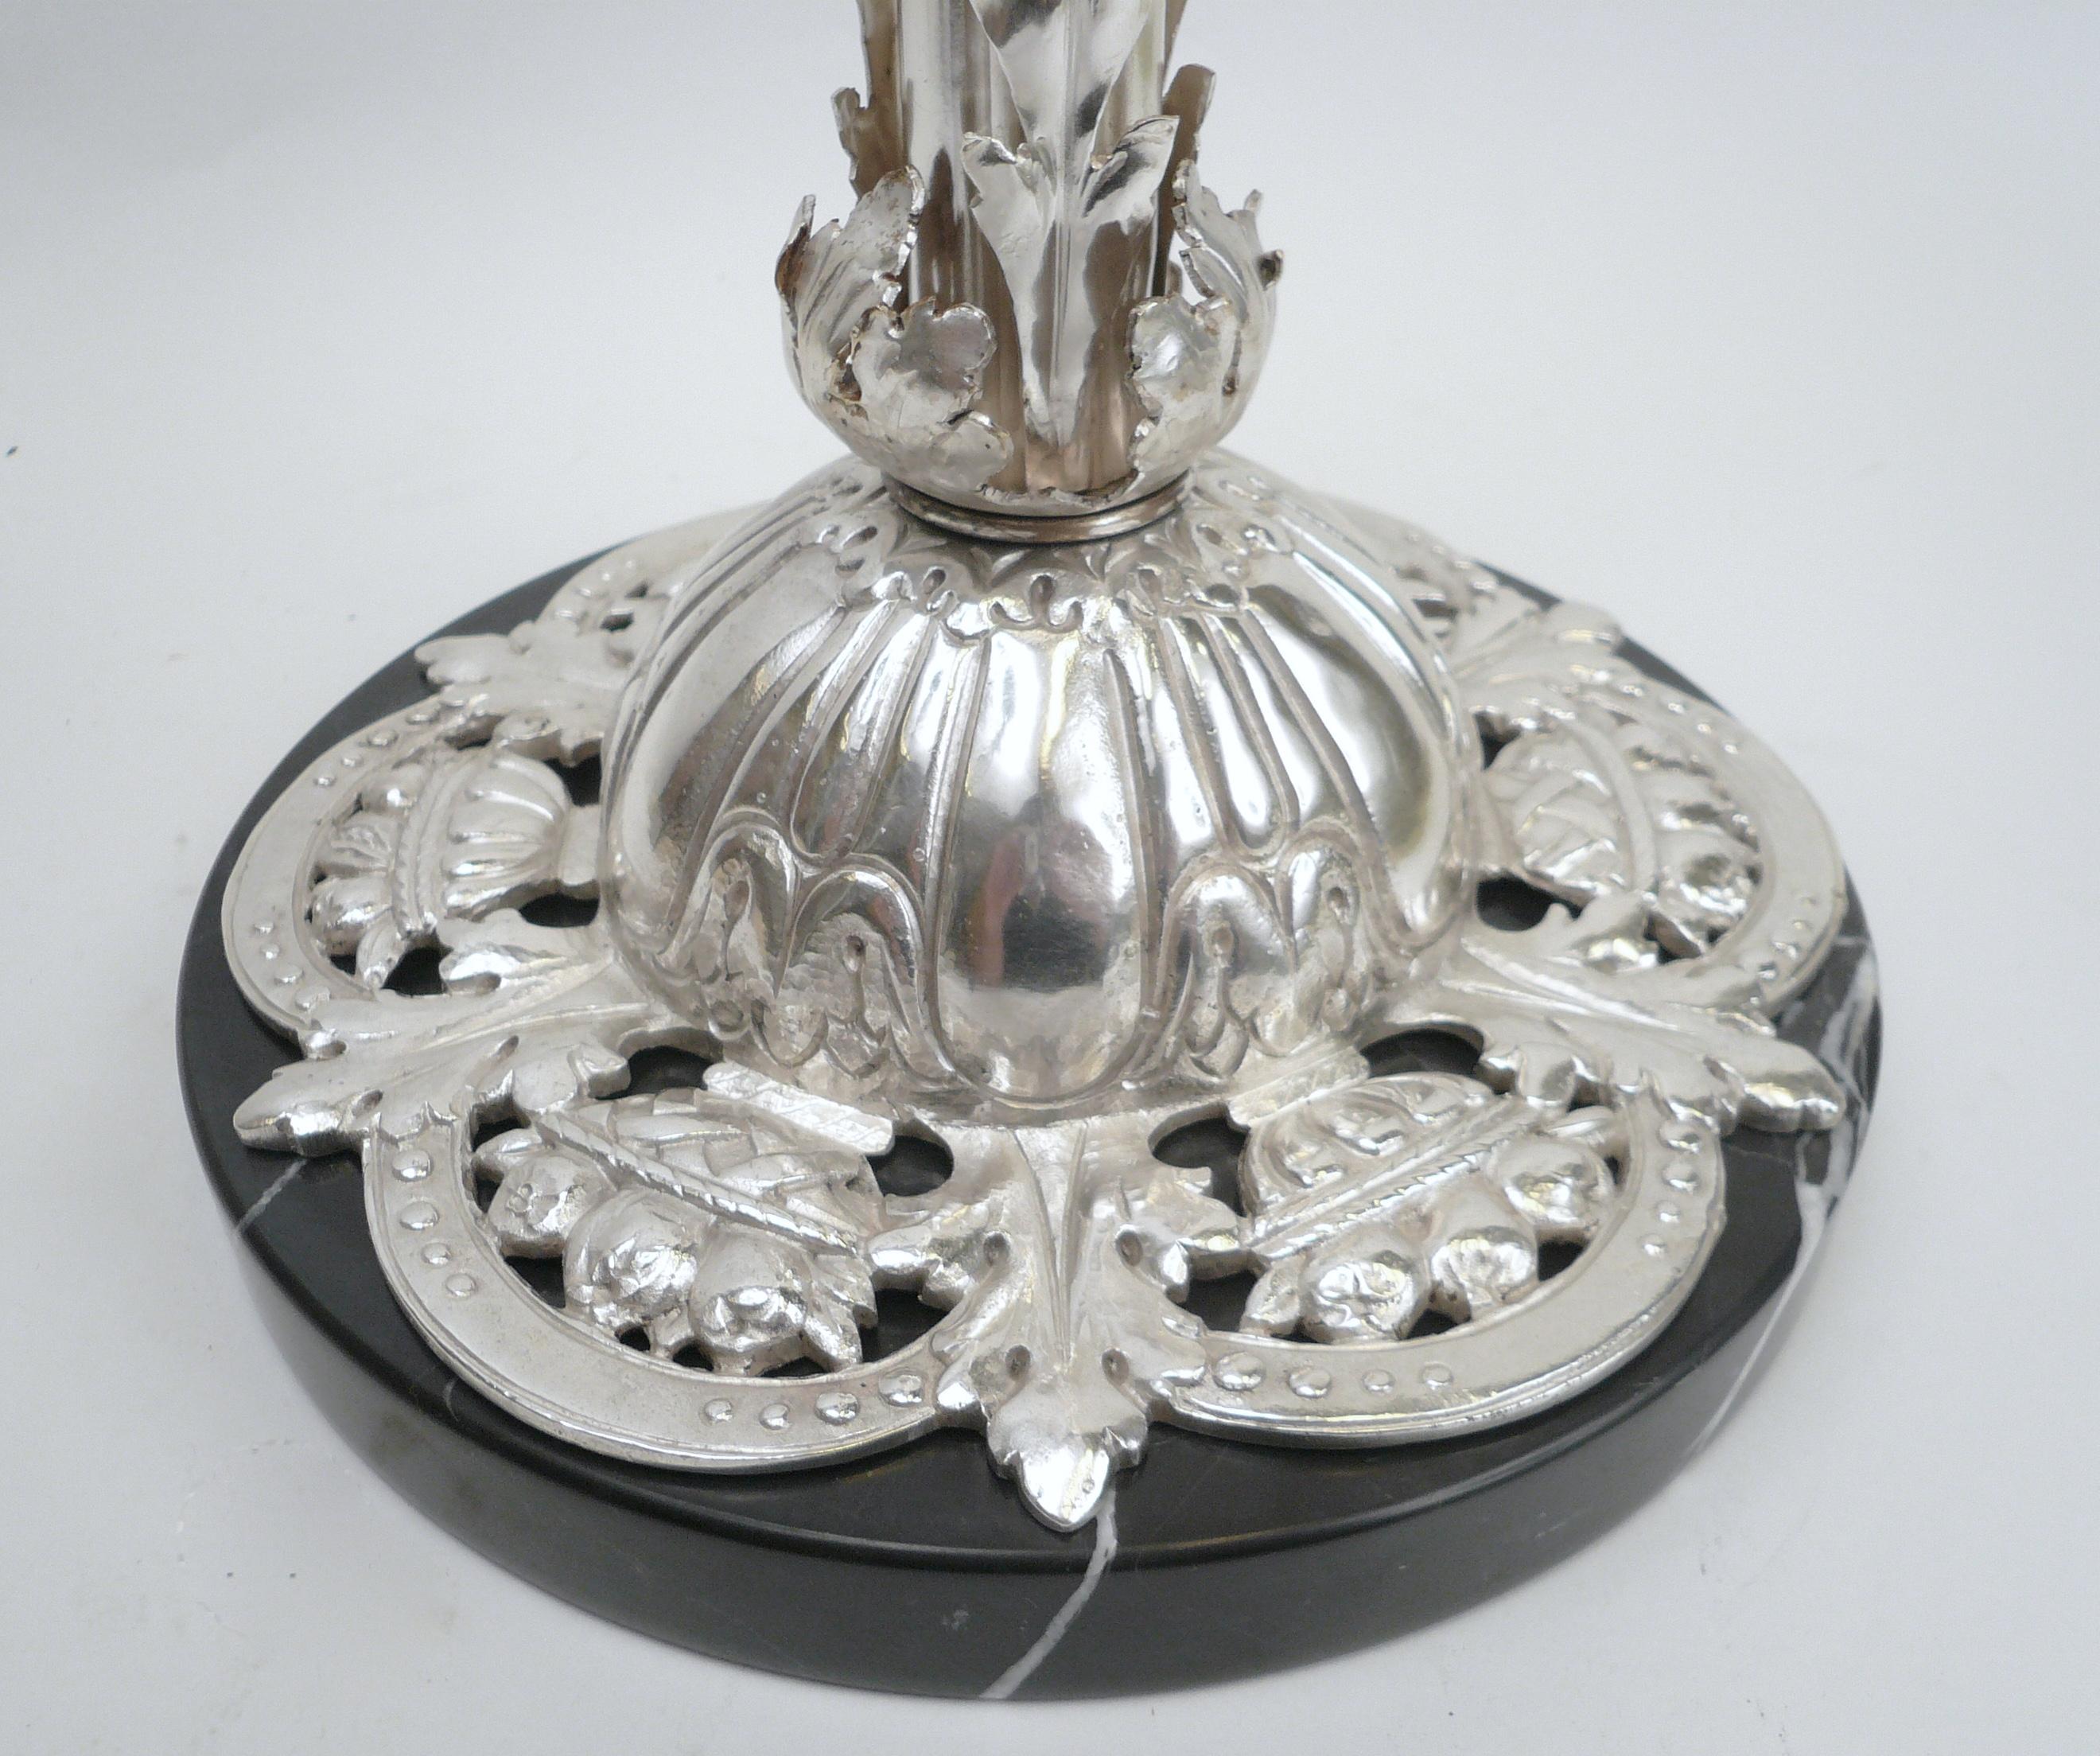 This handsome hand-hammered and cast bronze table lamp features foliate motifs, and a pierced floral base.